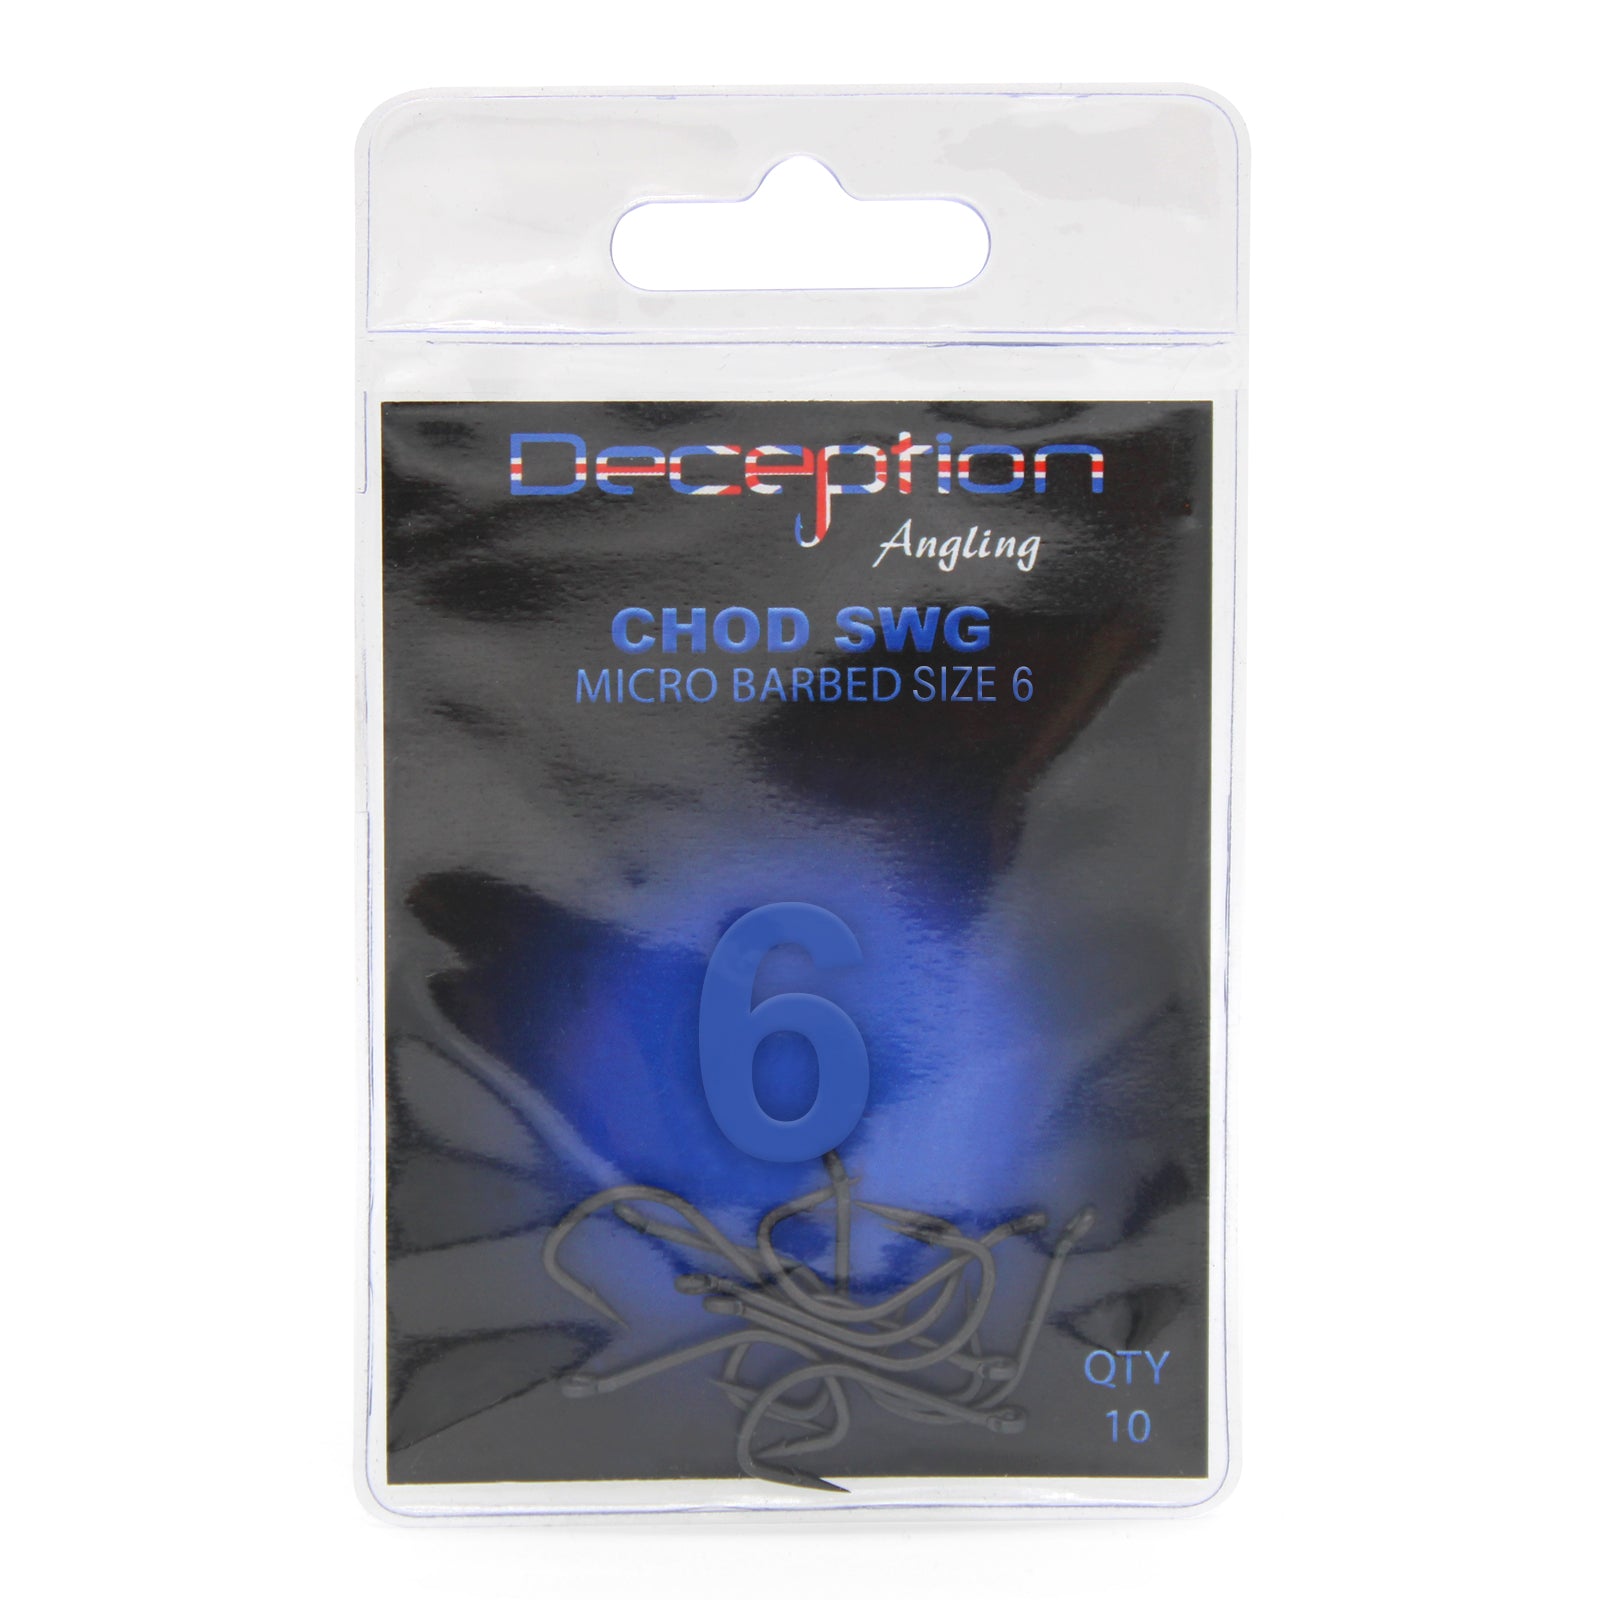 Deception Angling Chod SWG Micro Barbed Fishing Hooks Size 6 - Pack of 10